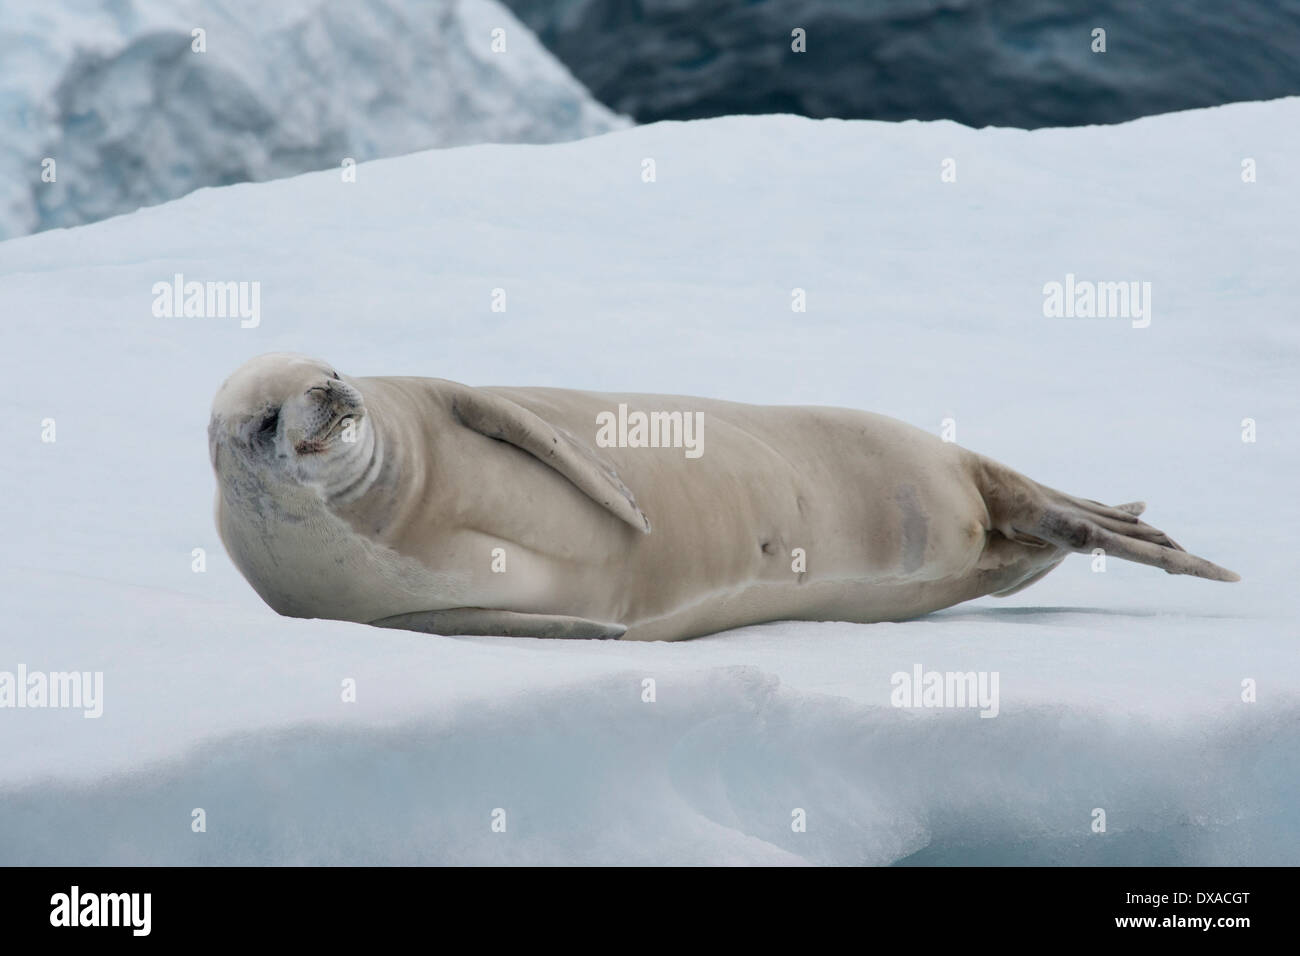 Crabeater seal, Lobodon carcinophagus, resting on an iceberg with glacier in background. Antarctic Peninsula. Stock Photo